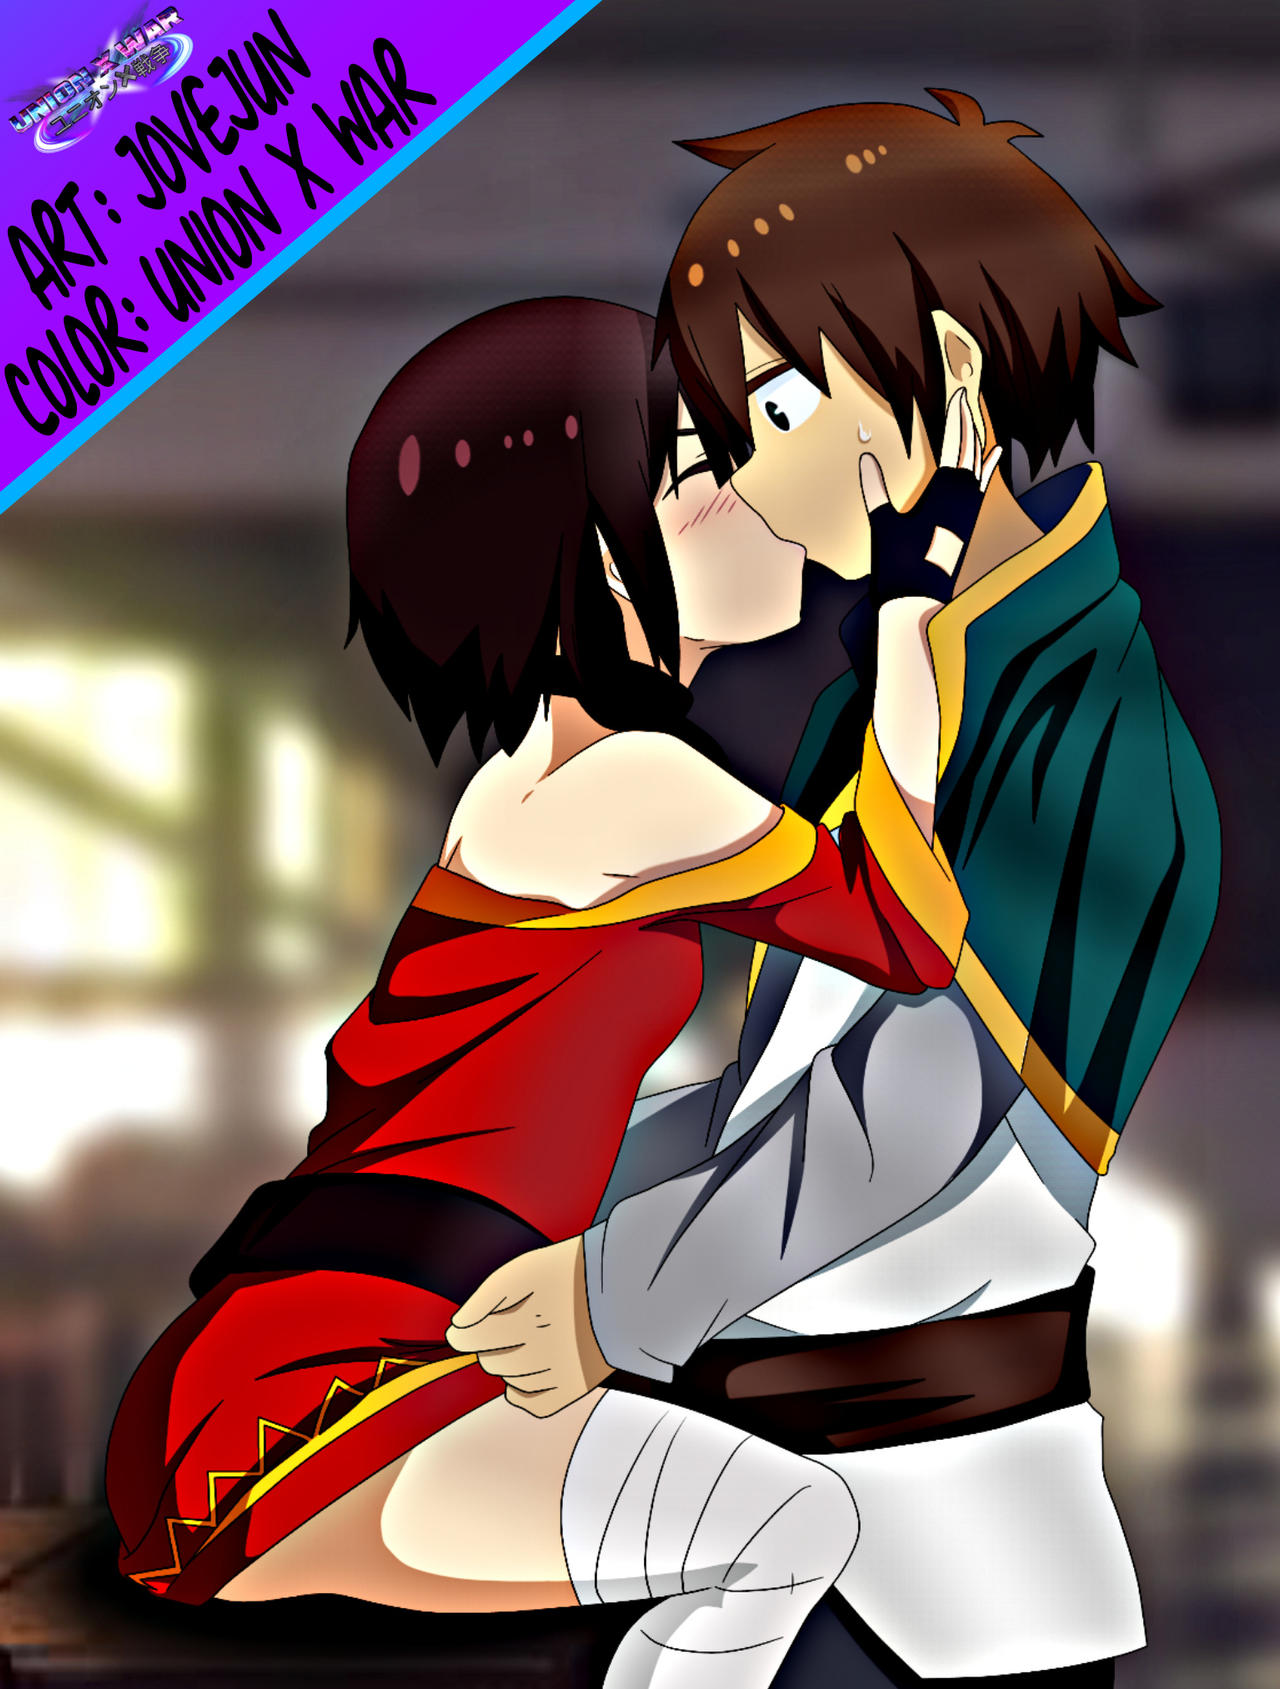 Anime edit= kazuma: what are you looking at me? by UnionXW on DeviantArt